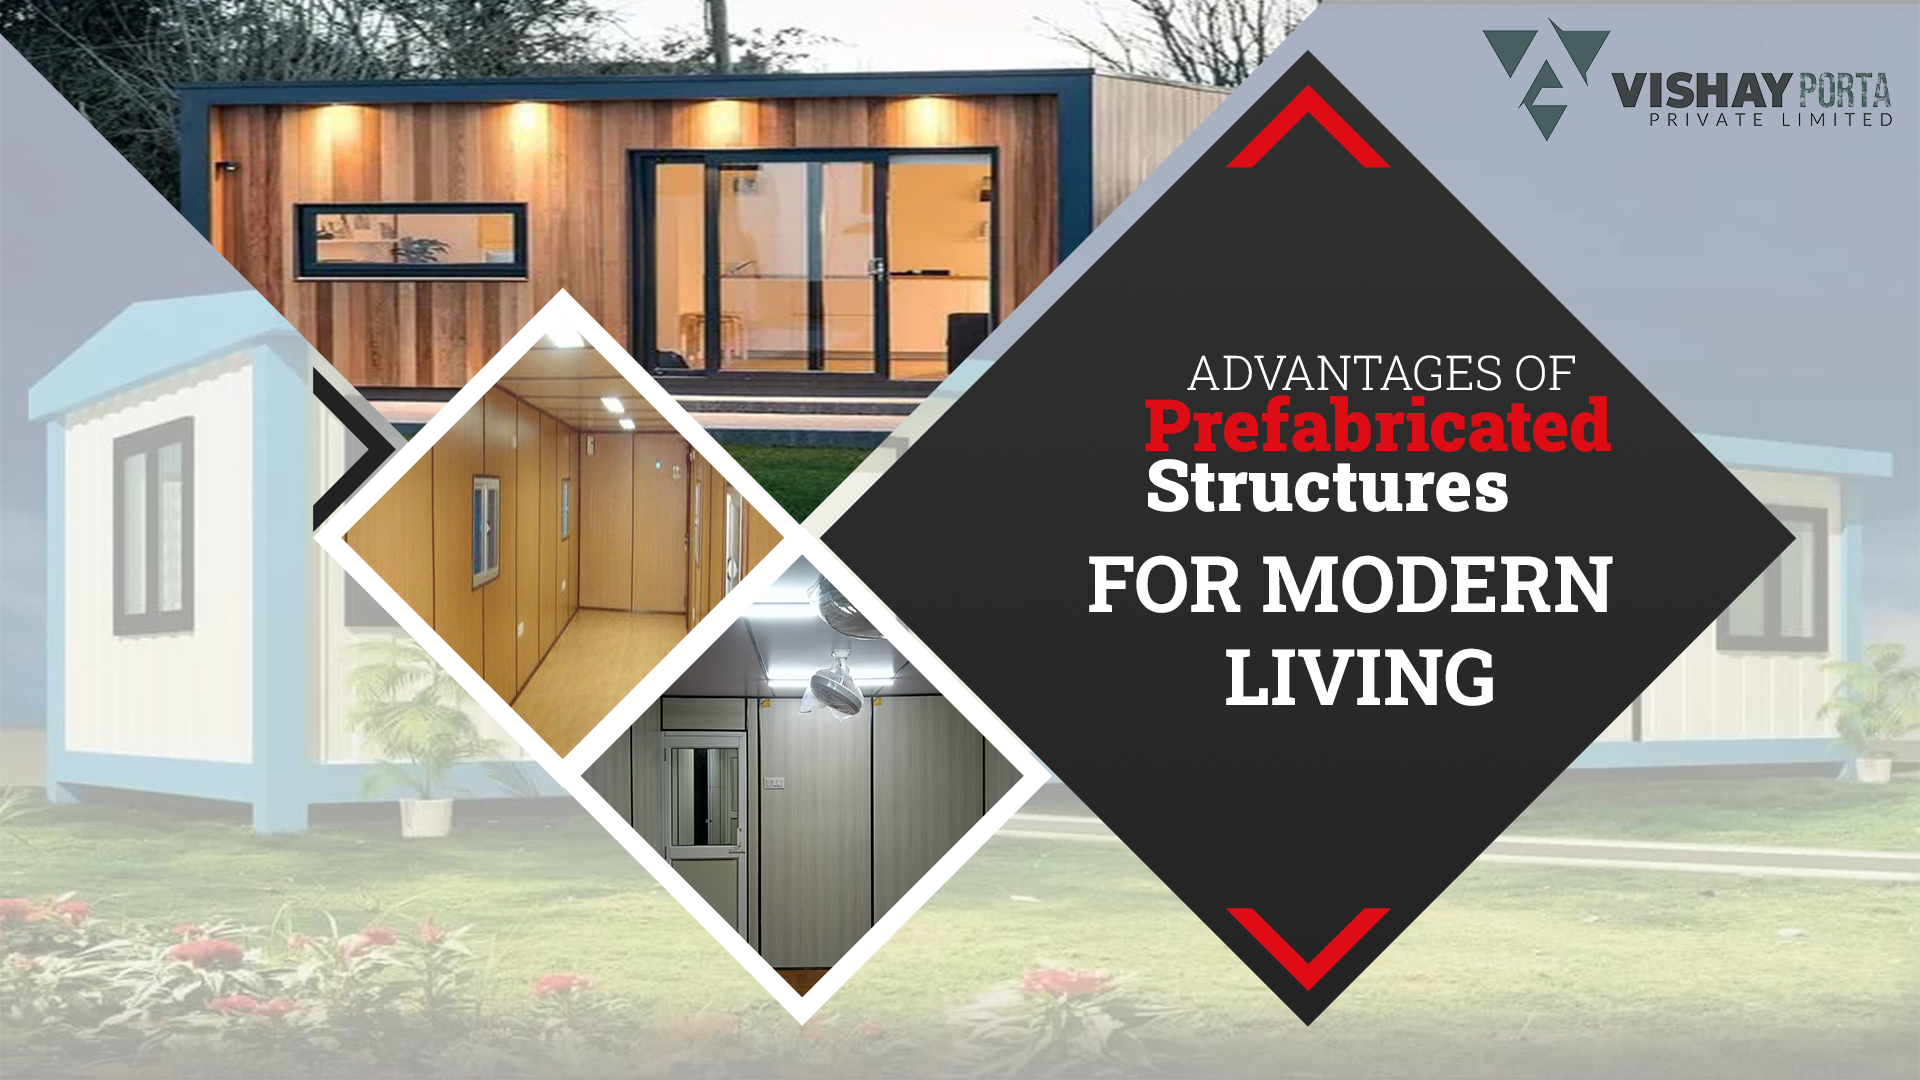 The Advantages of Prefabricated Structures for Modern Living